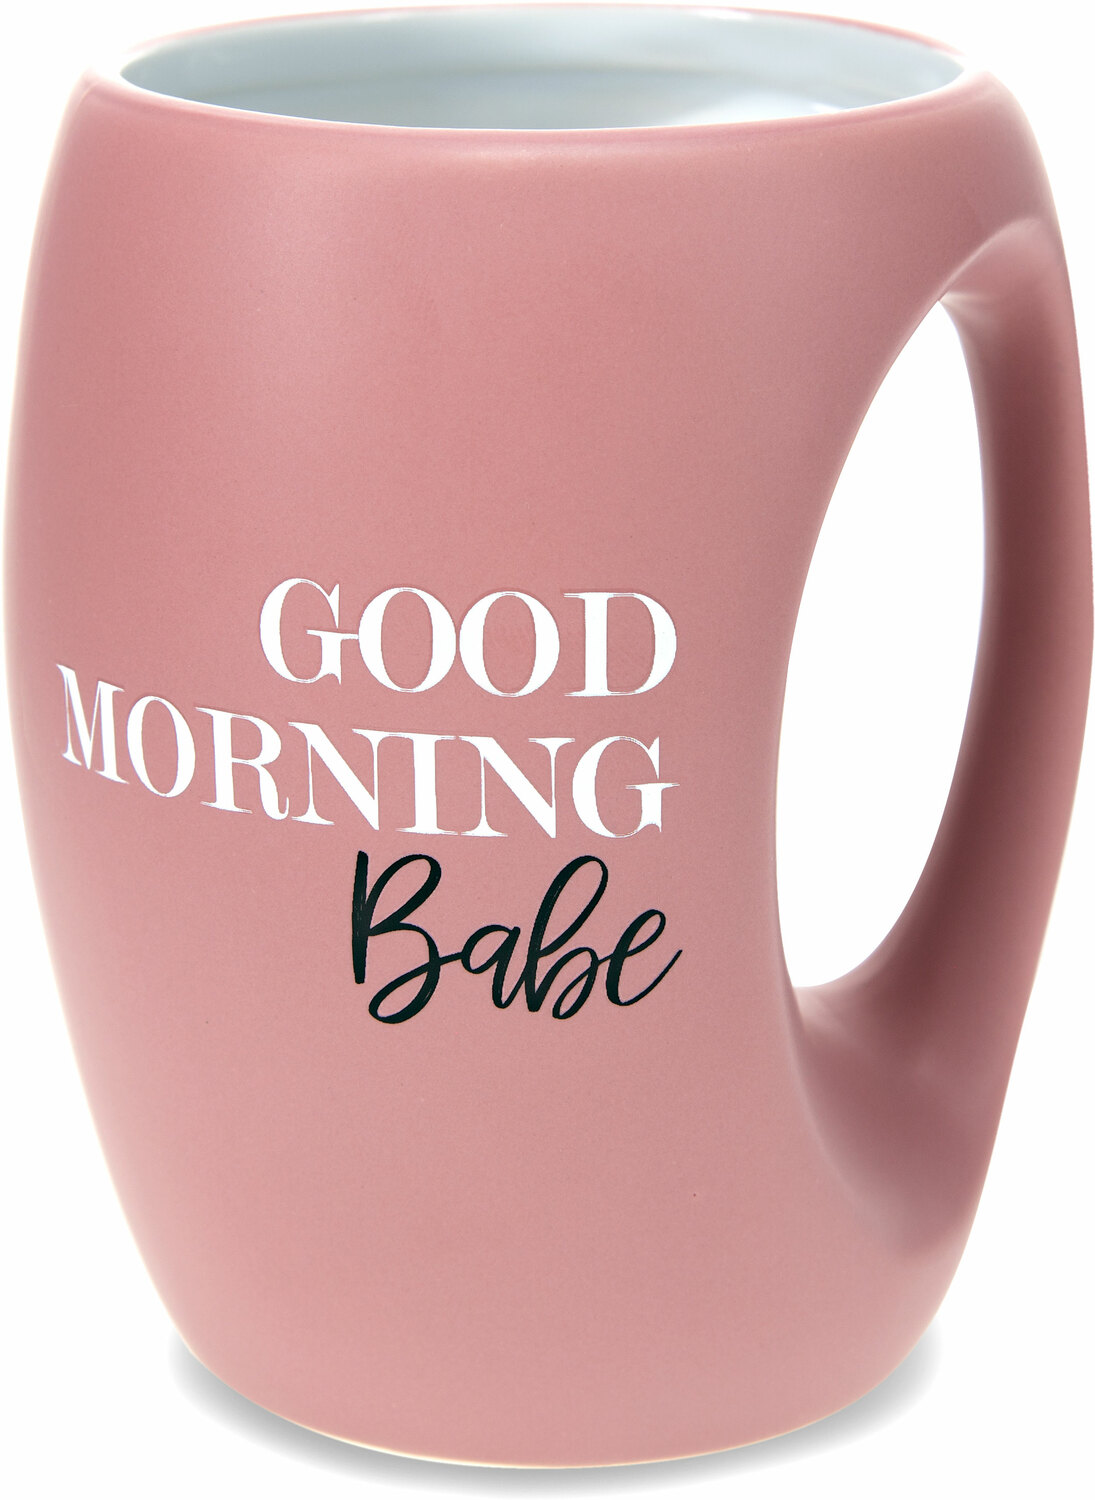 Babe by Good Morning - Babe - 16 oz Cup